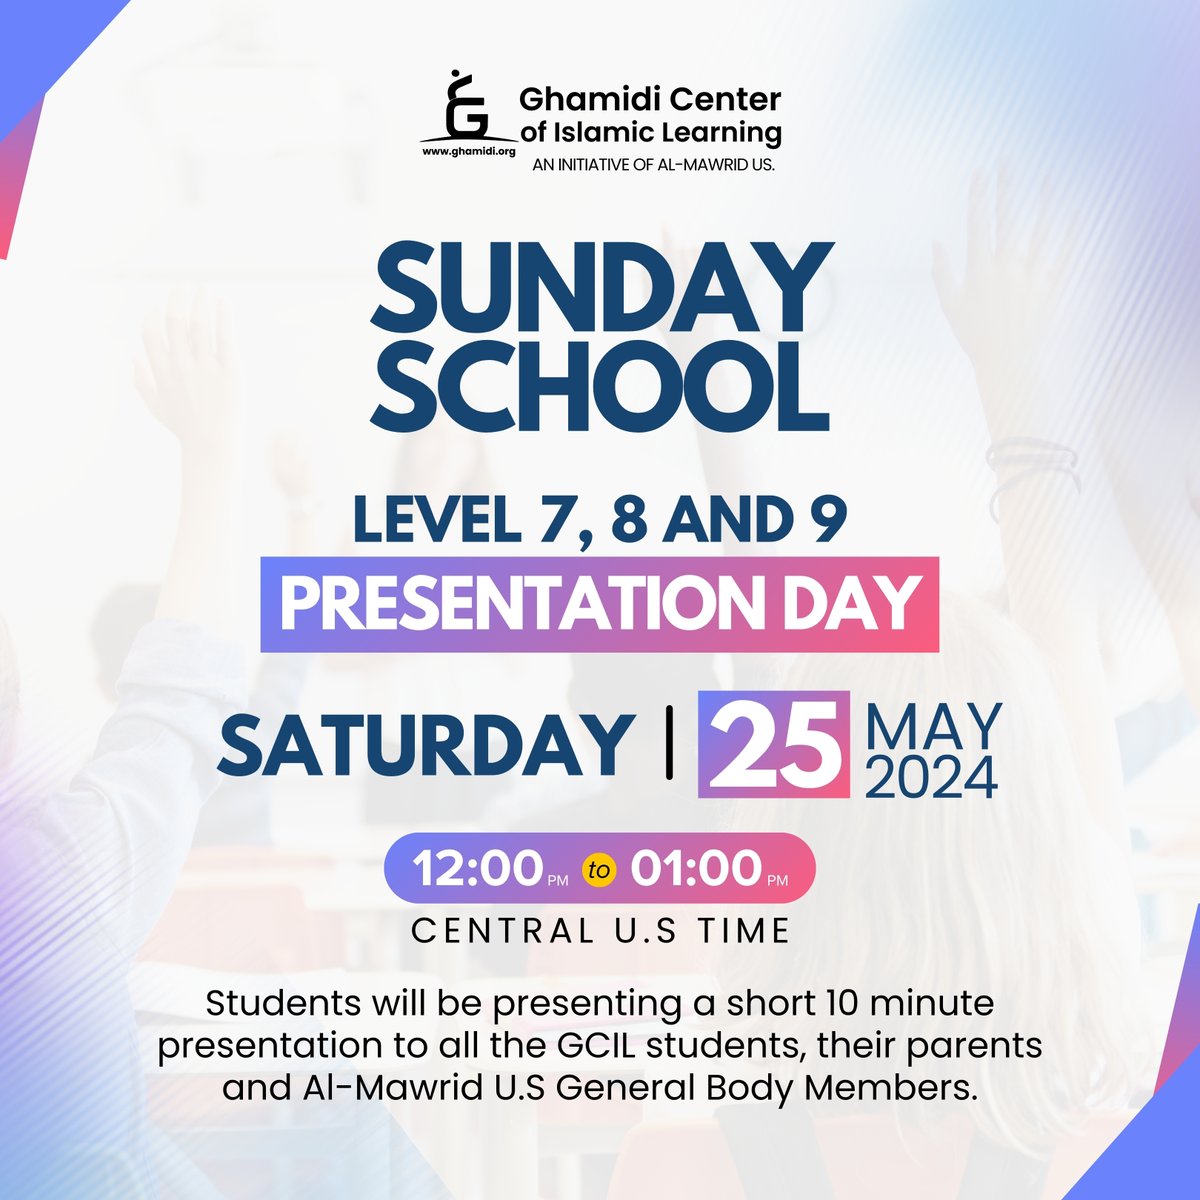 Following the success of the inaugural Presentation Day event, the Ghamidi Center of Islamic Learning cordially invites you to join us for the second edition.  

Presentation Day - 25th May 2024  
Time: 12:00 PM (CT) 

#GCIL #AlMawridUS #Ghamidi #Ghamidicenter #sundayschool